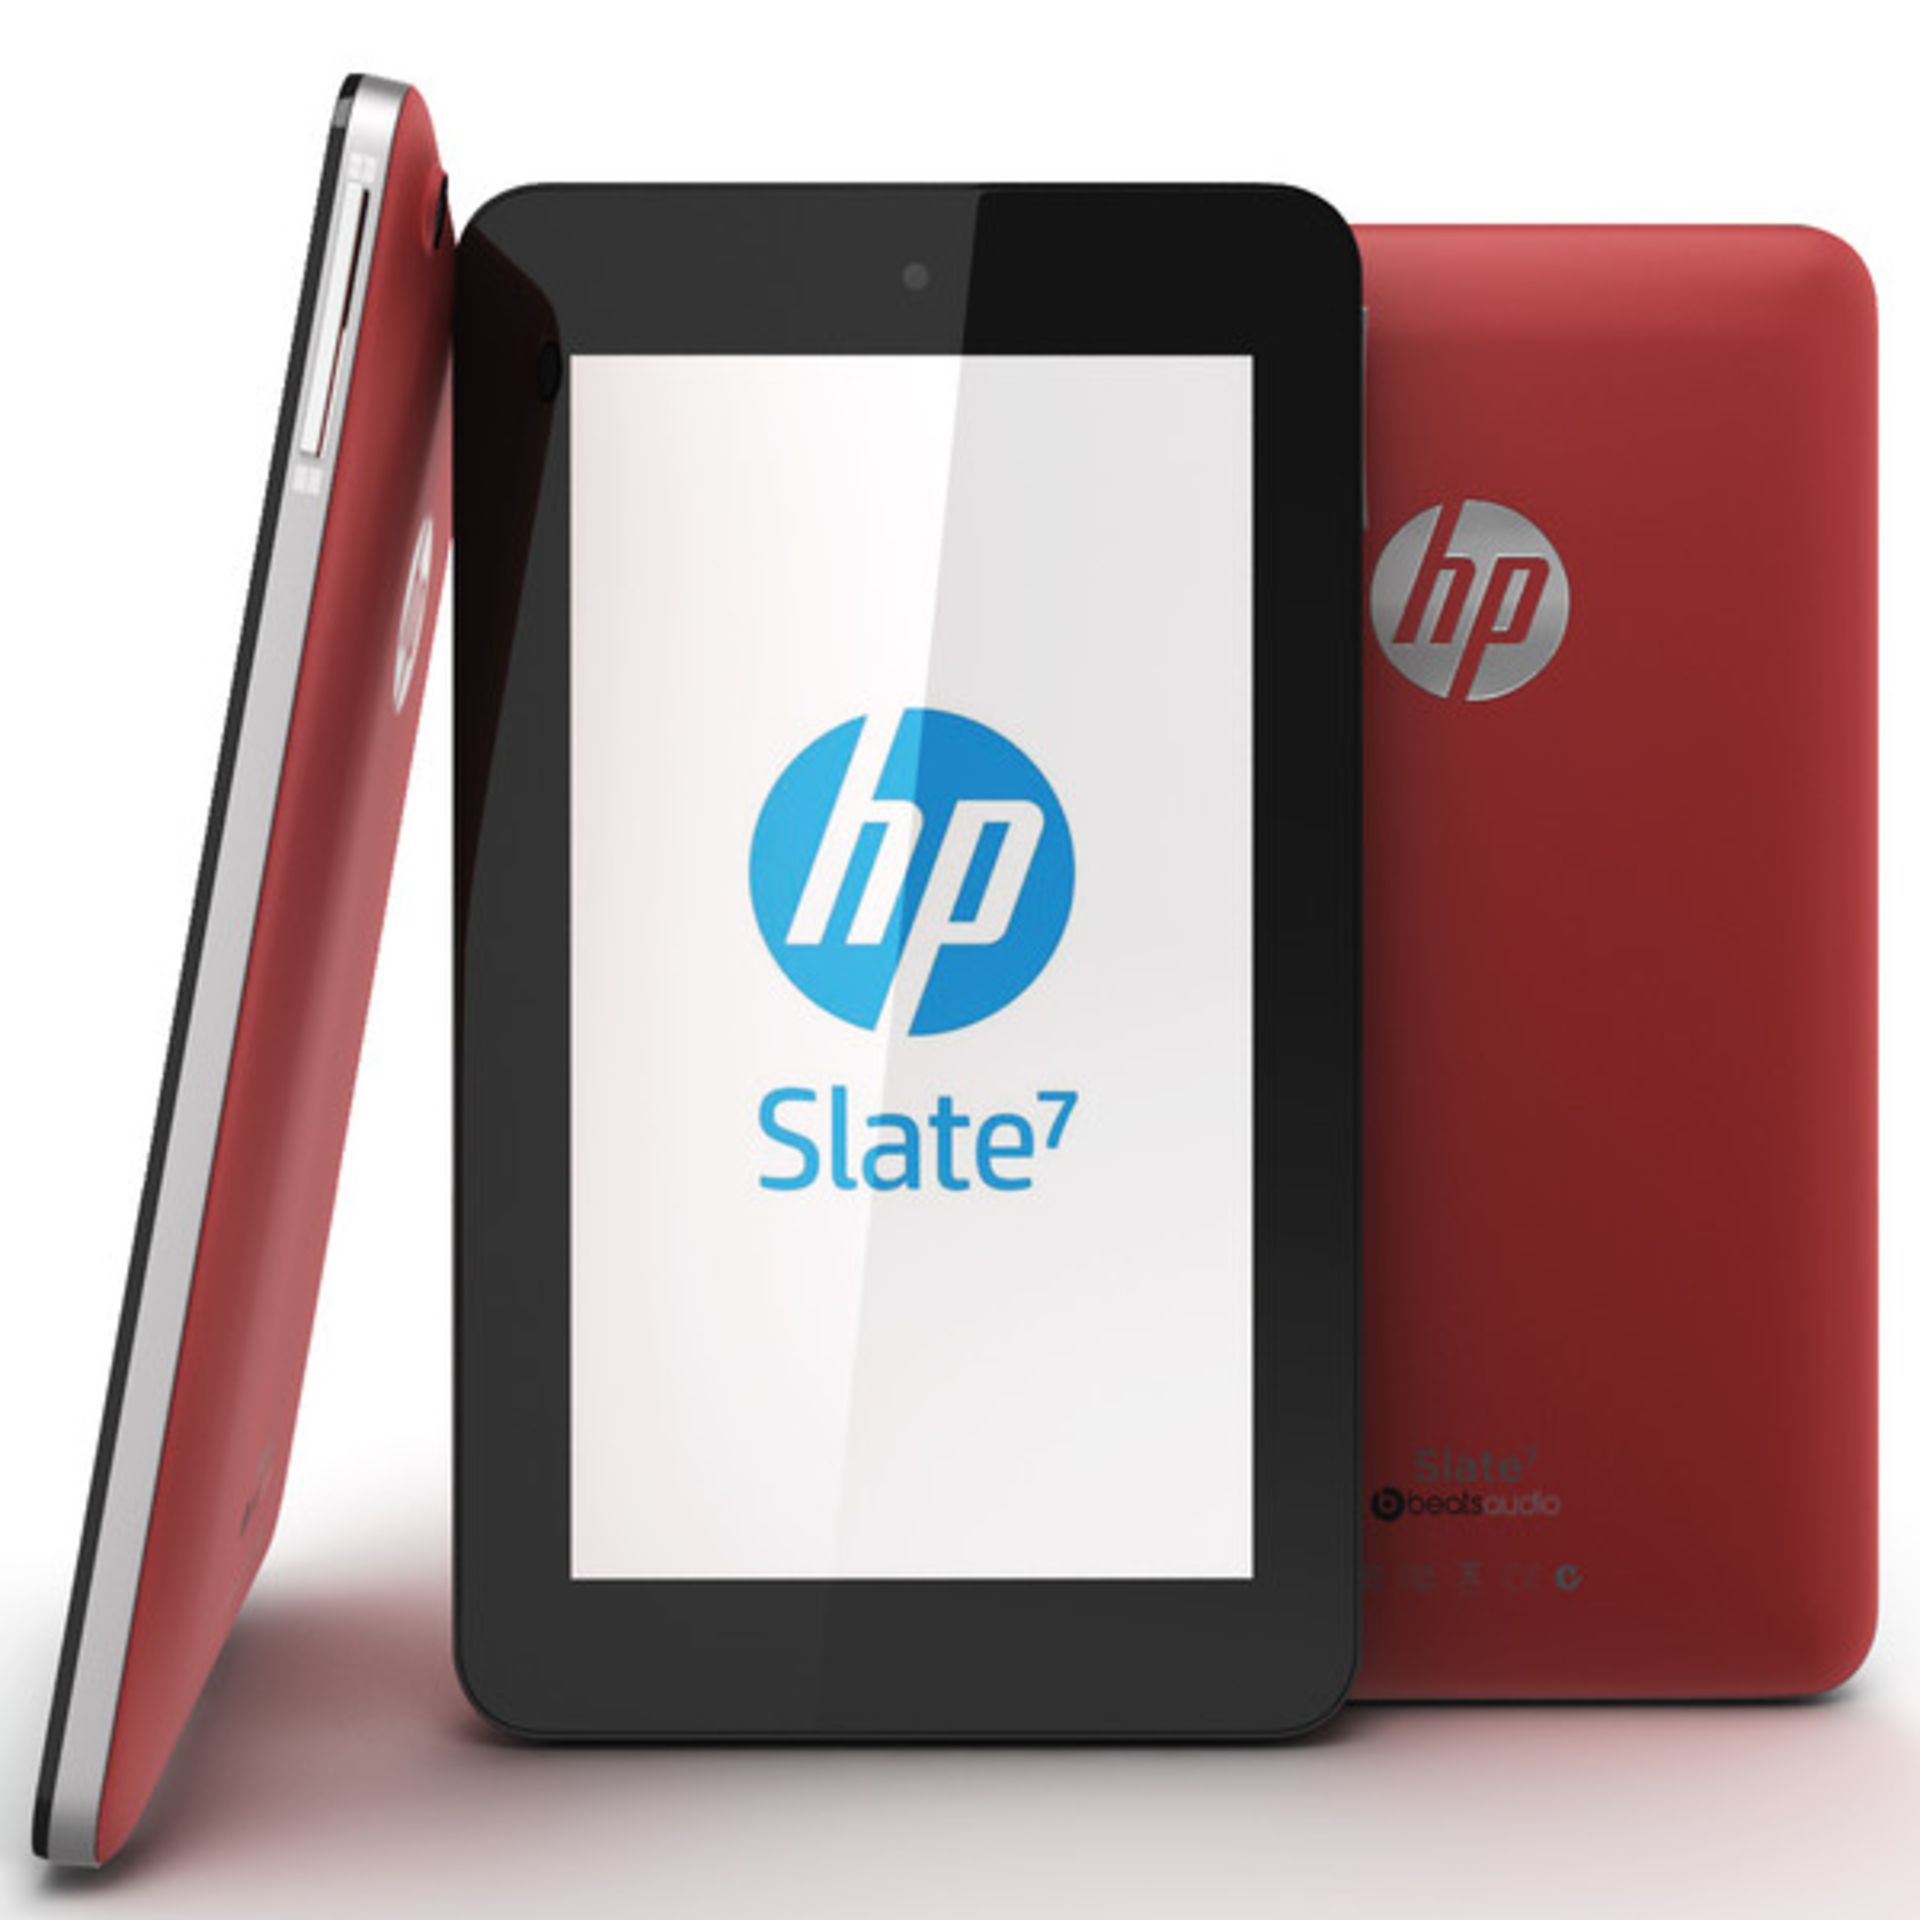 V HP Slate - 16GB Dual Core & 1GB RAM - Front & Rear Cameras With Beats Audio